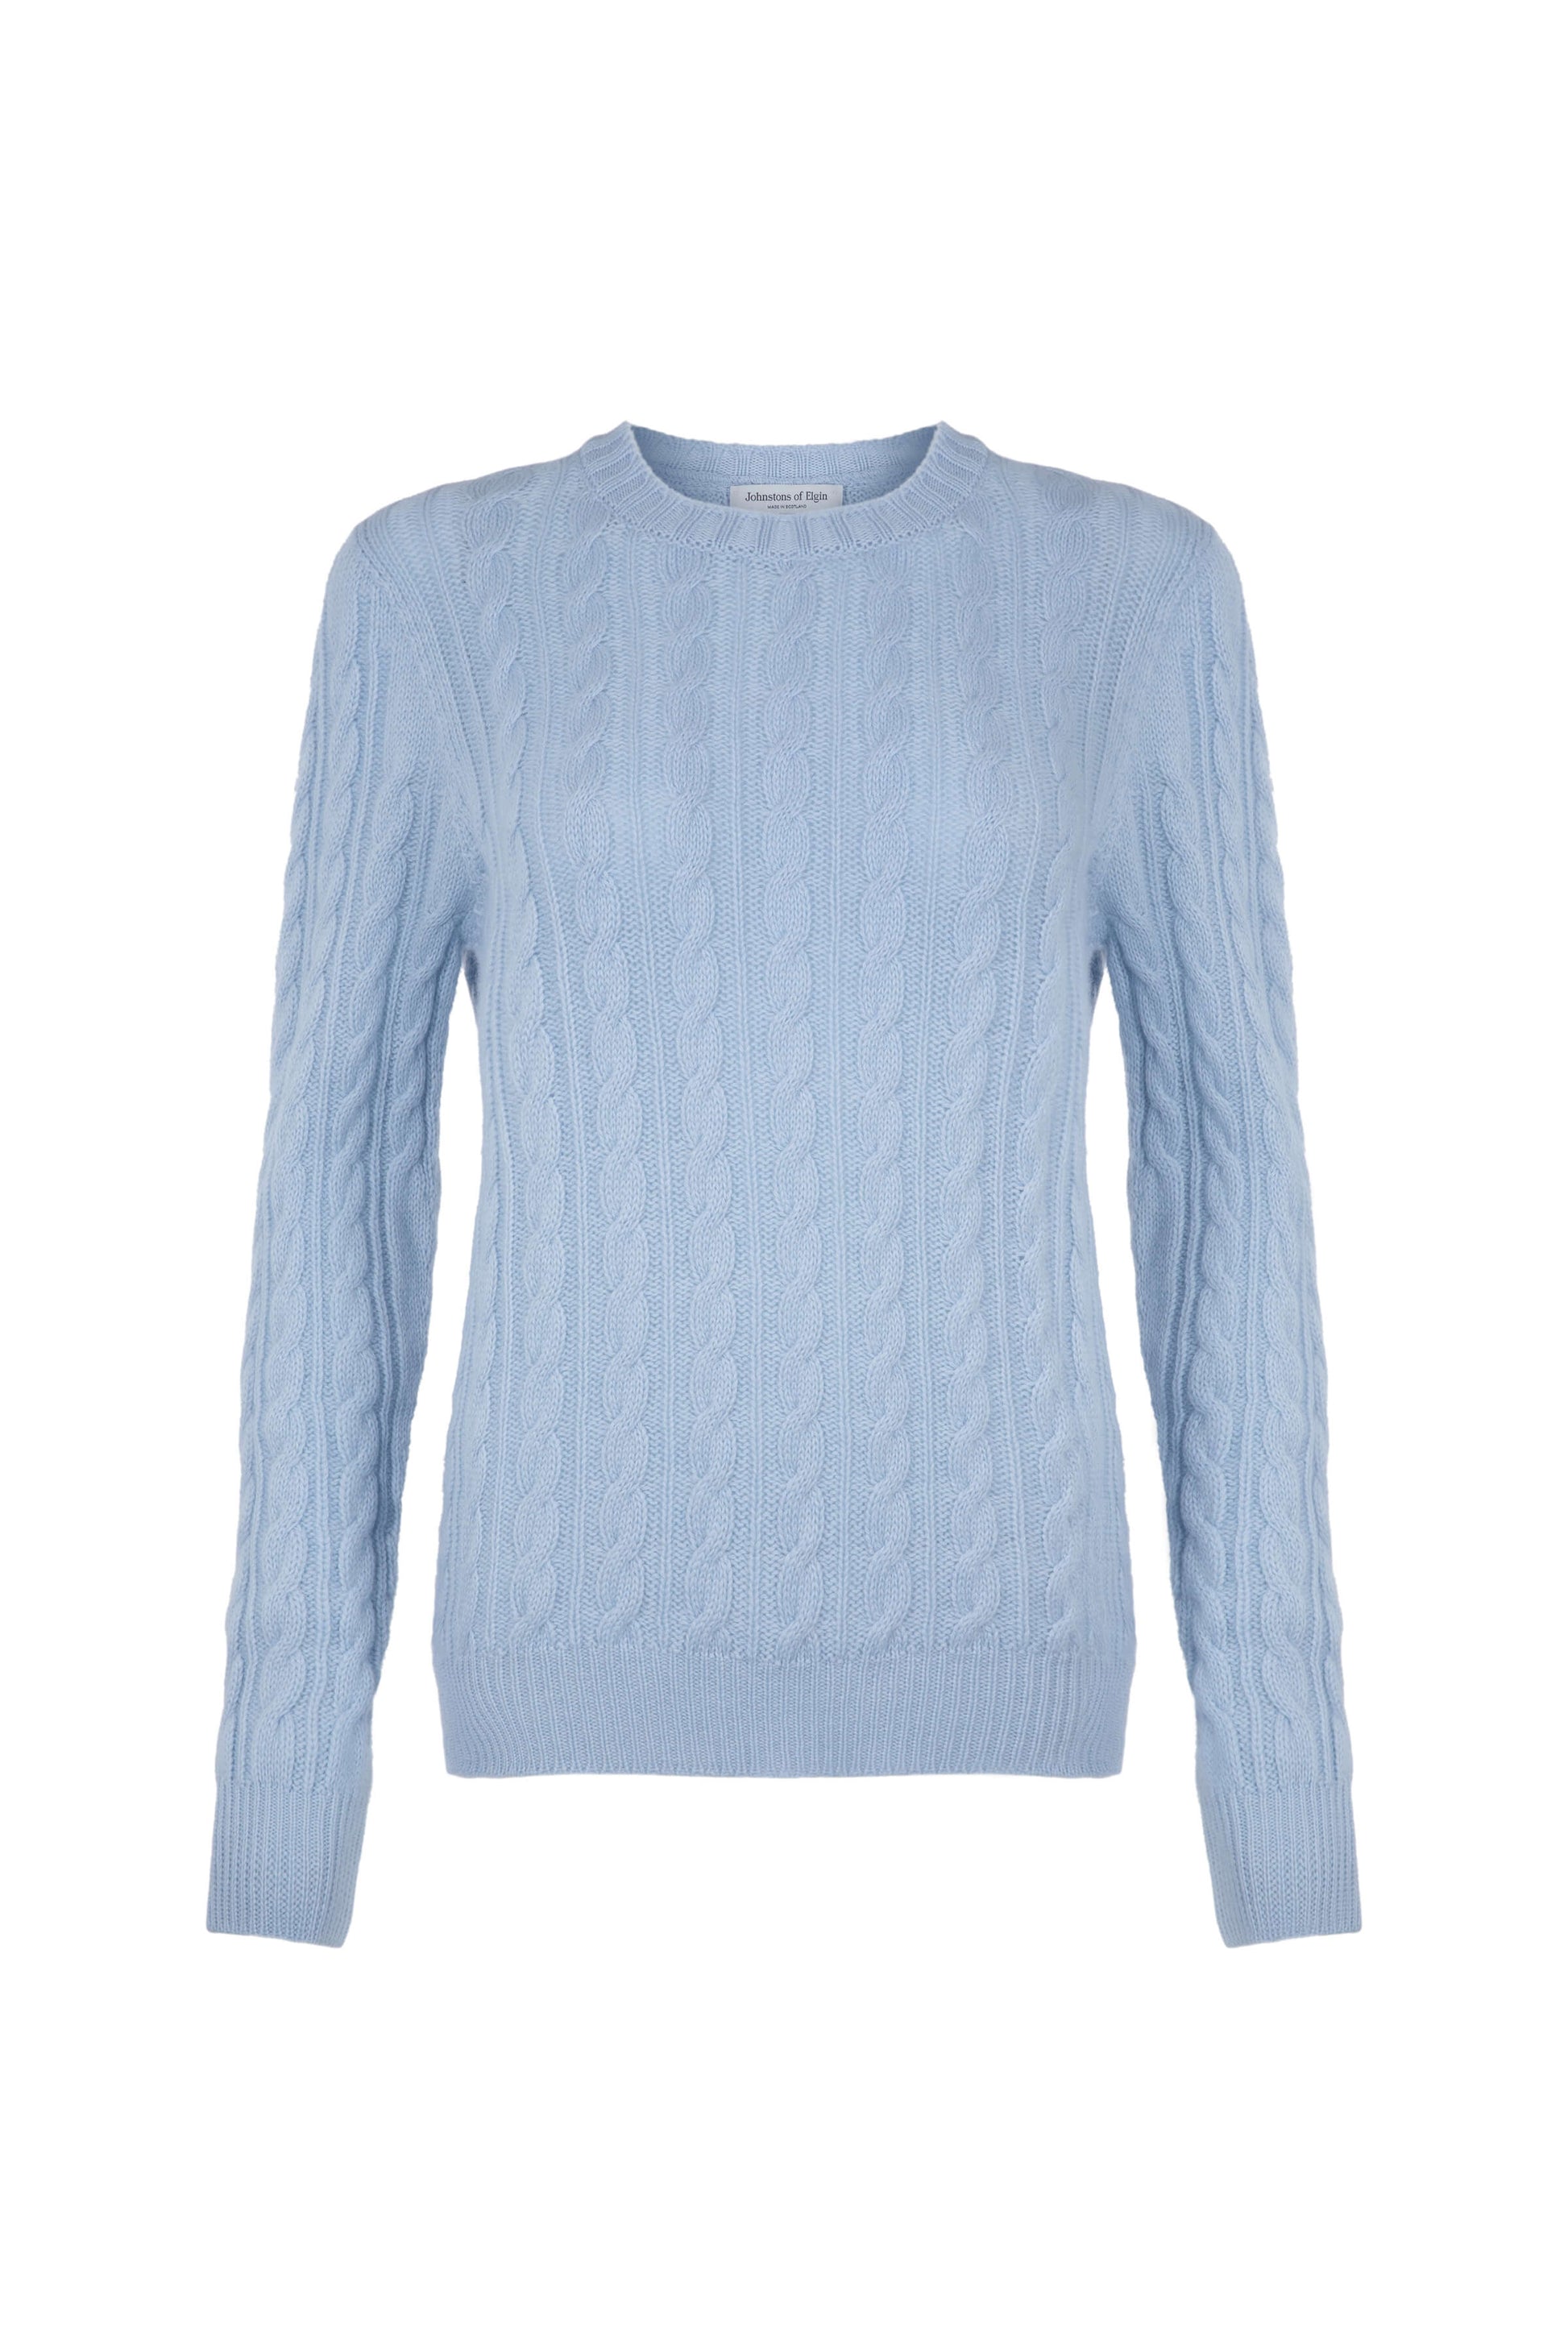 Johnstons of Elgin SS24 Women's Knitwear Sea Breeze Blue Cable Cashmere Sweater KAI05085SD0167